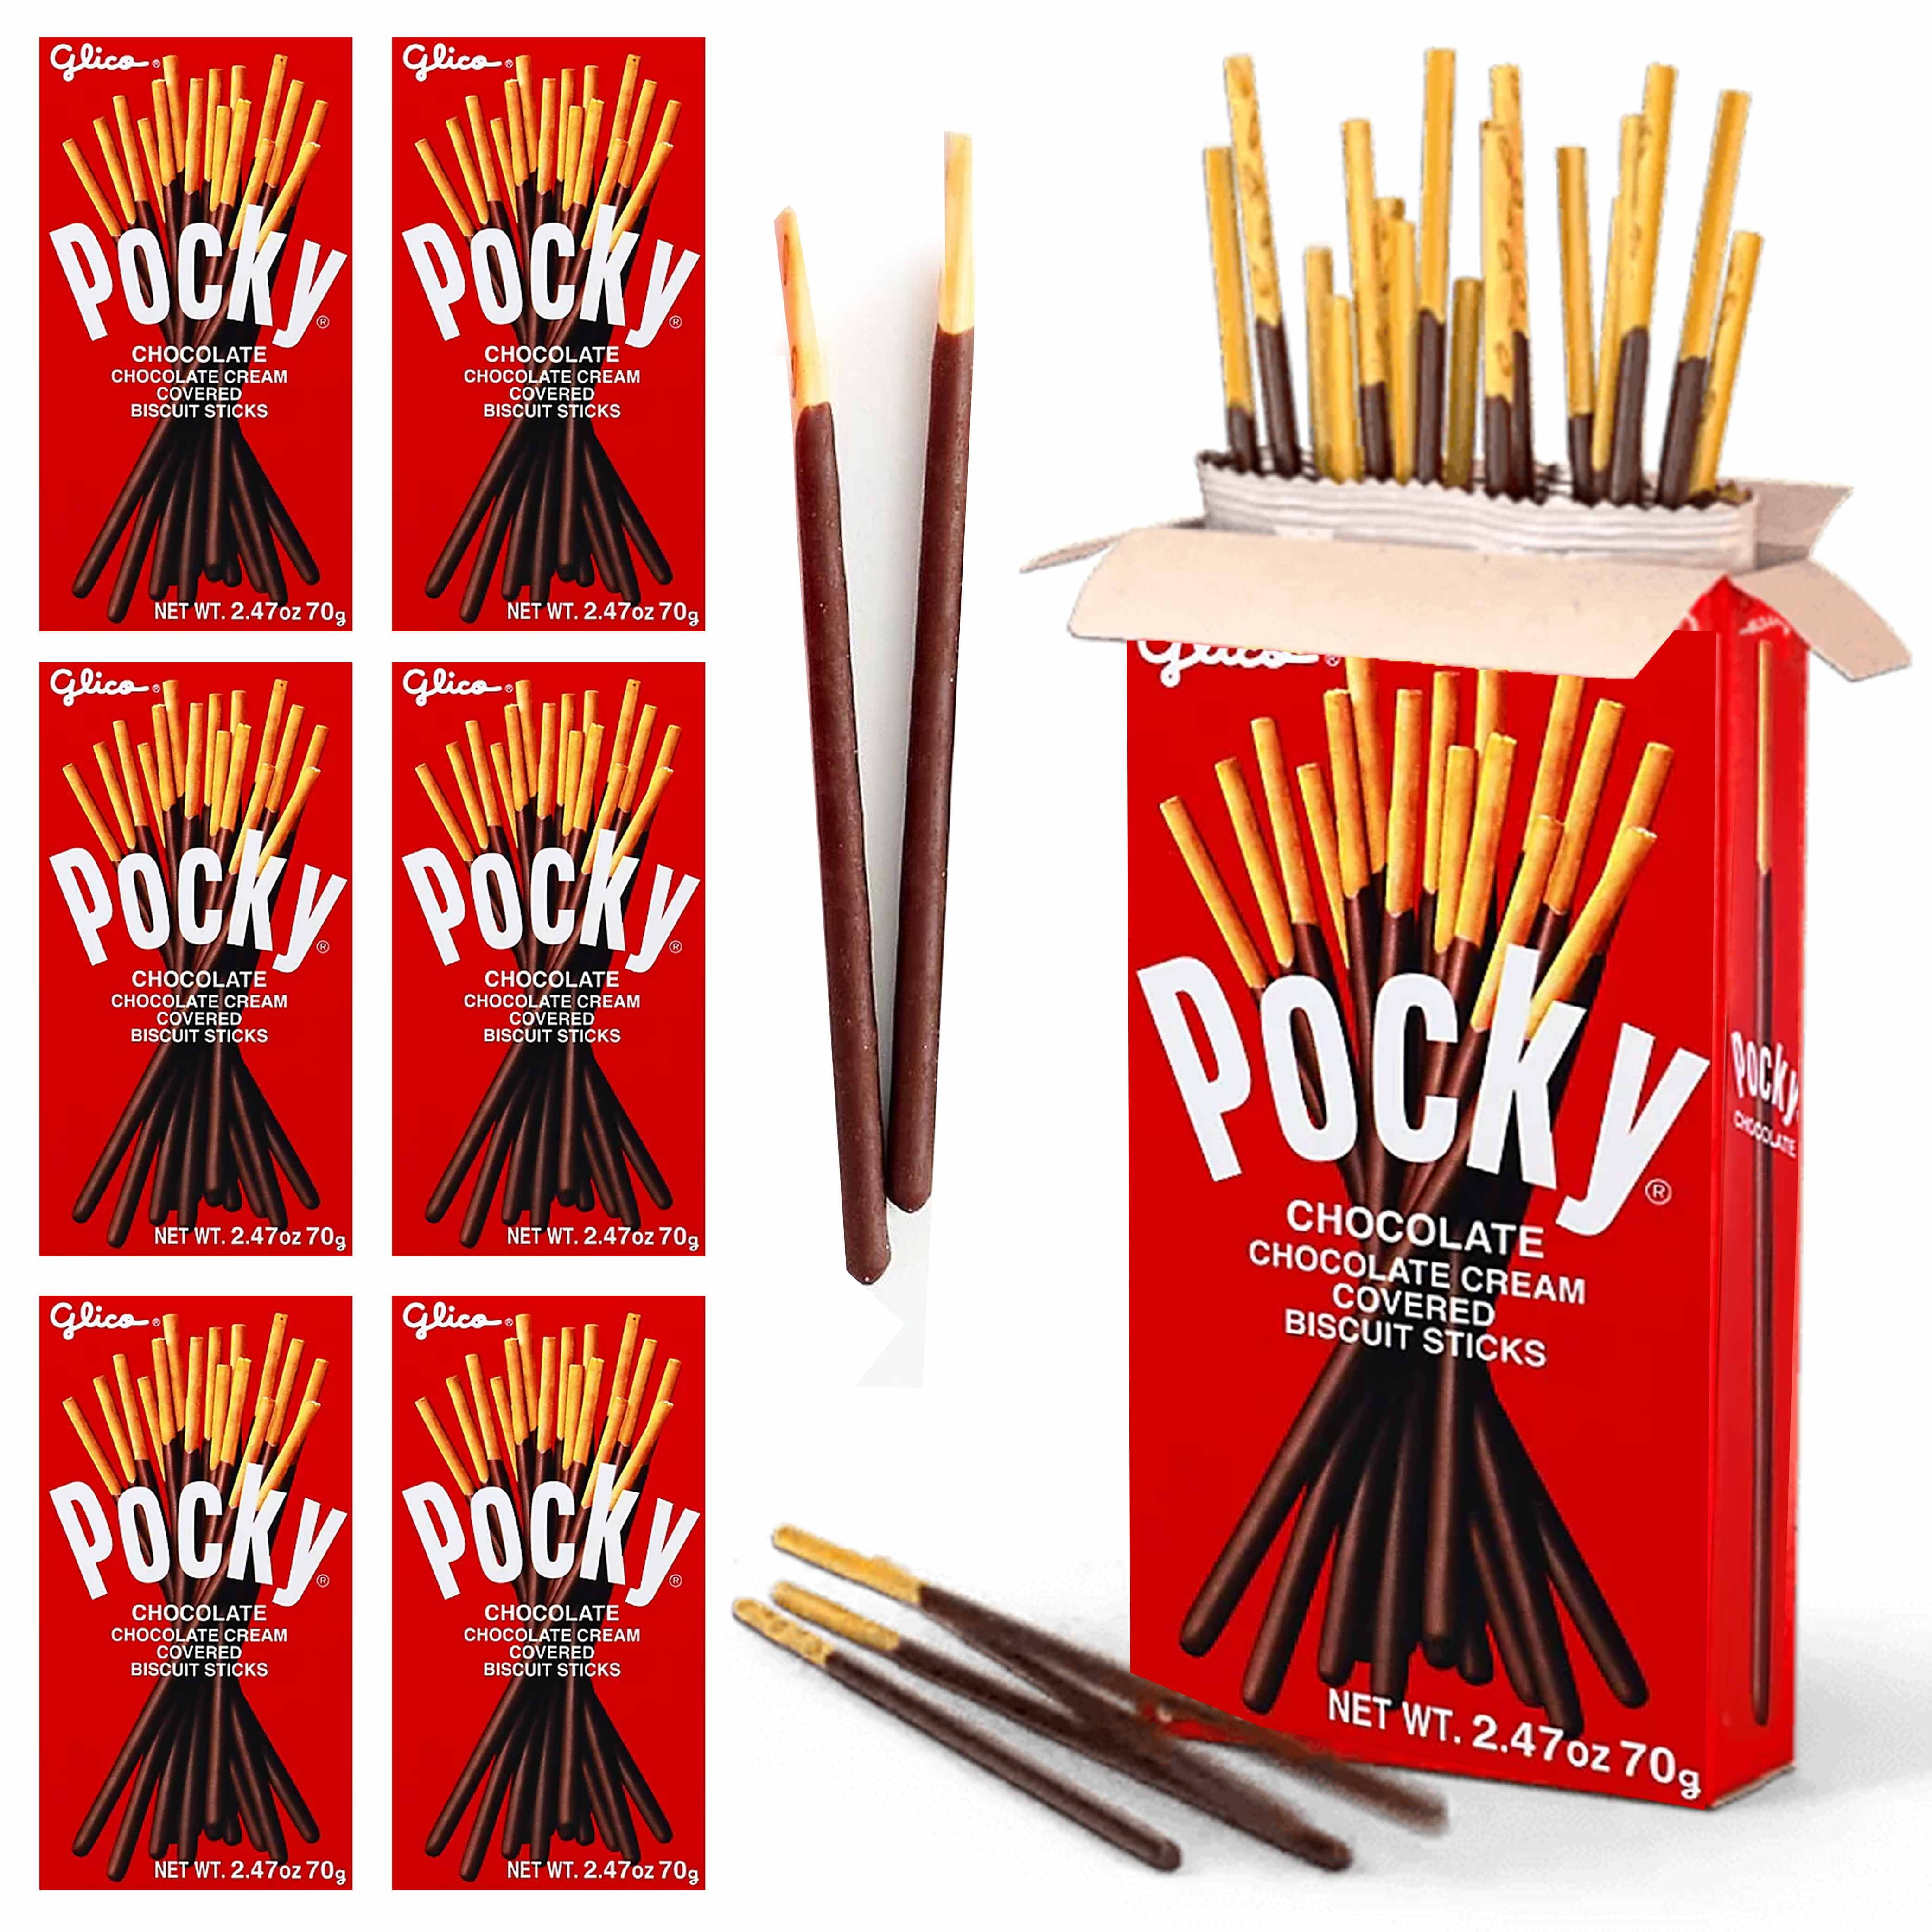 6 Packs Pocky Biscuit Sticks Coated Chocolate Cream Covered Cookie ...